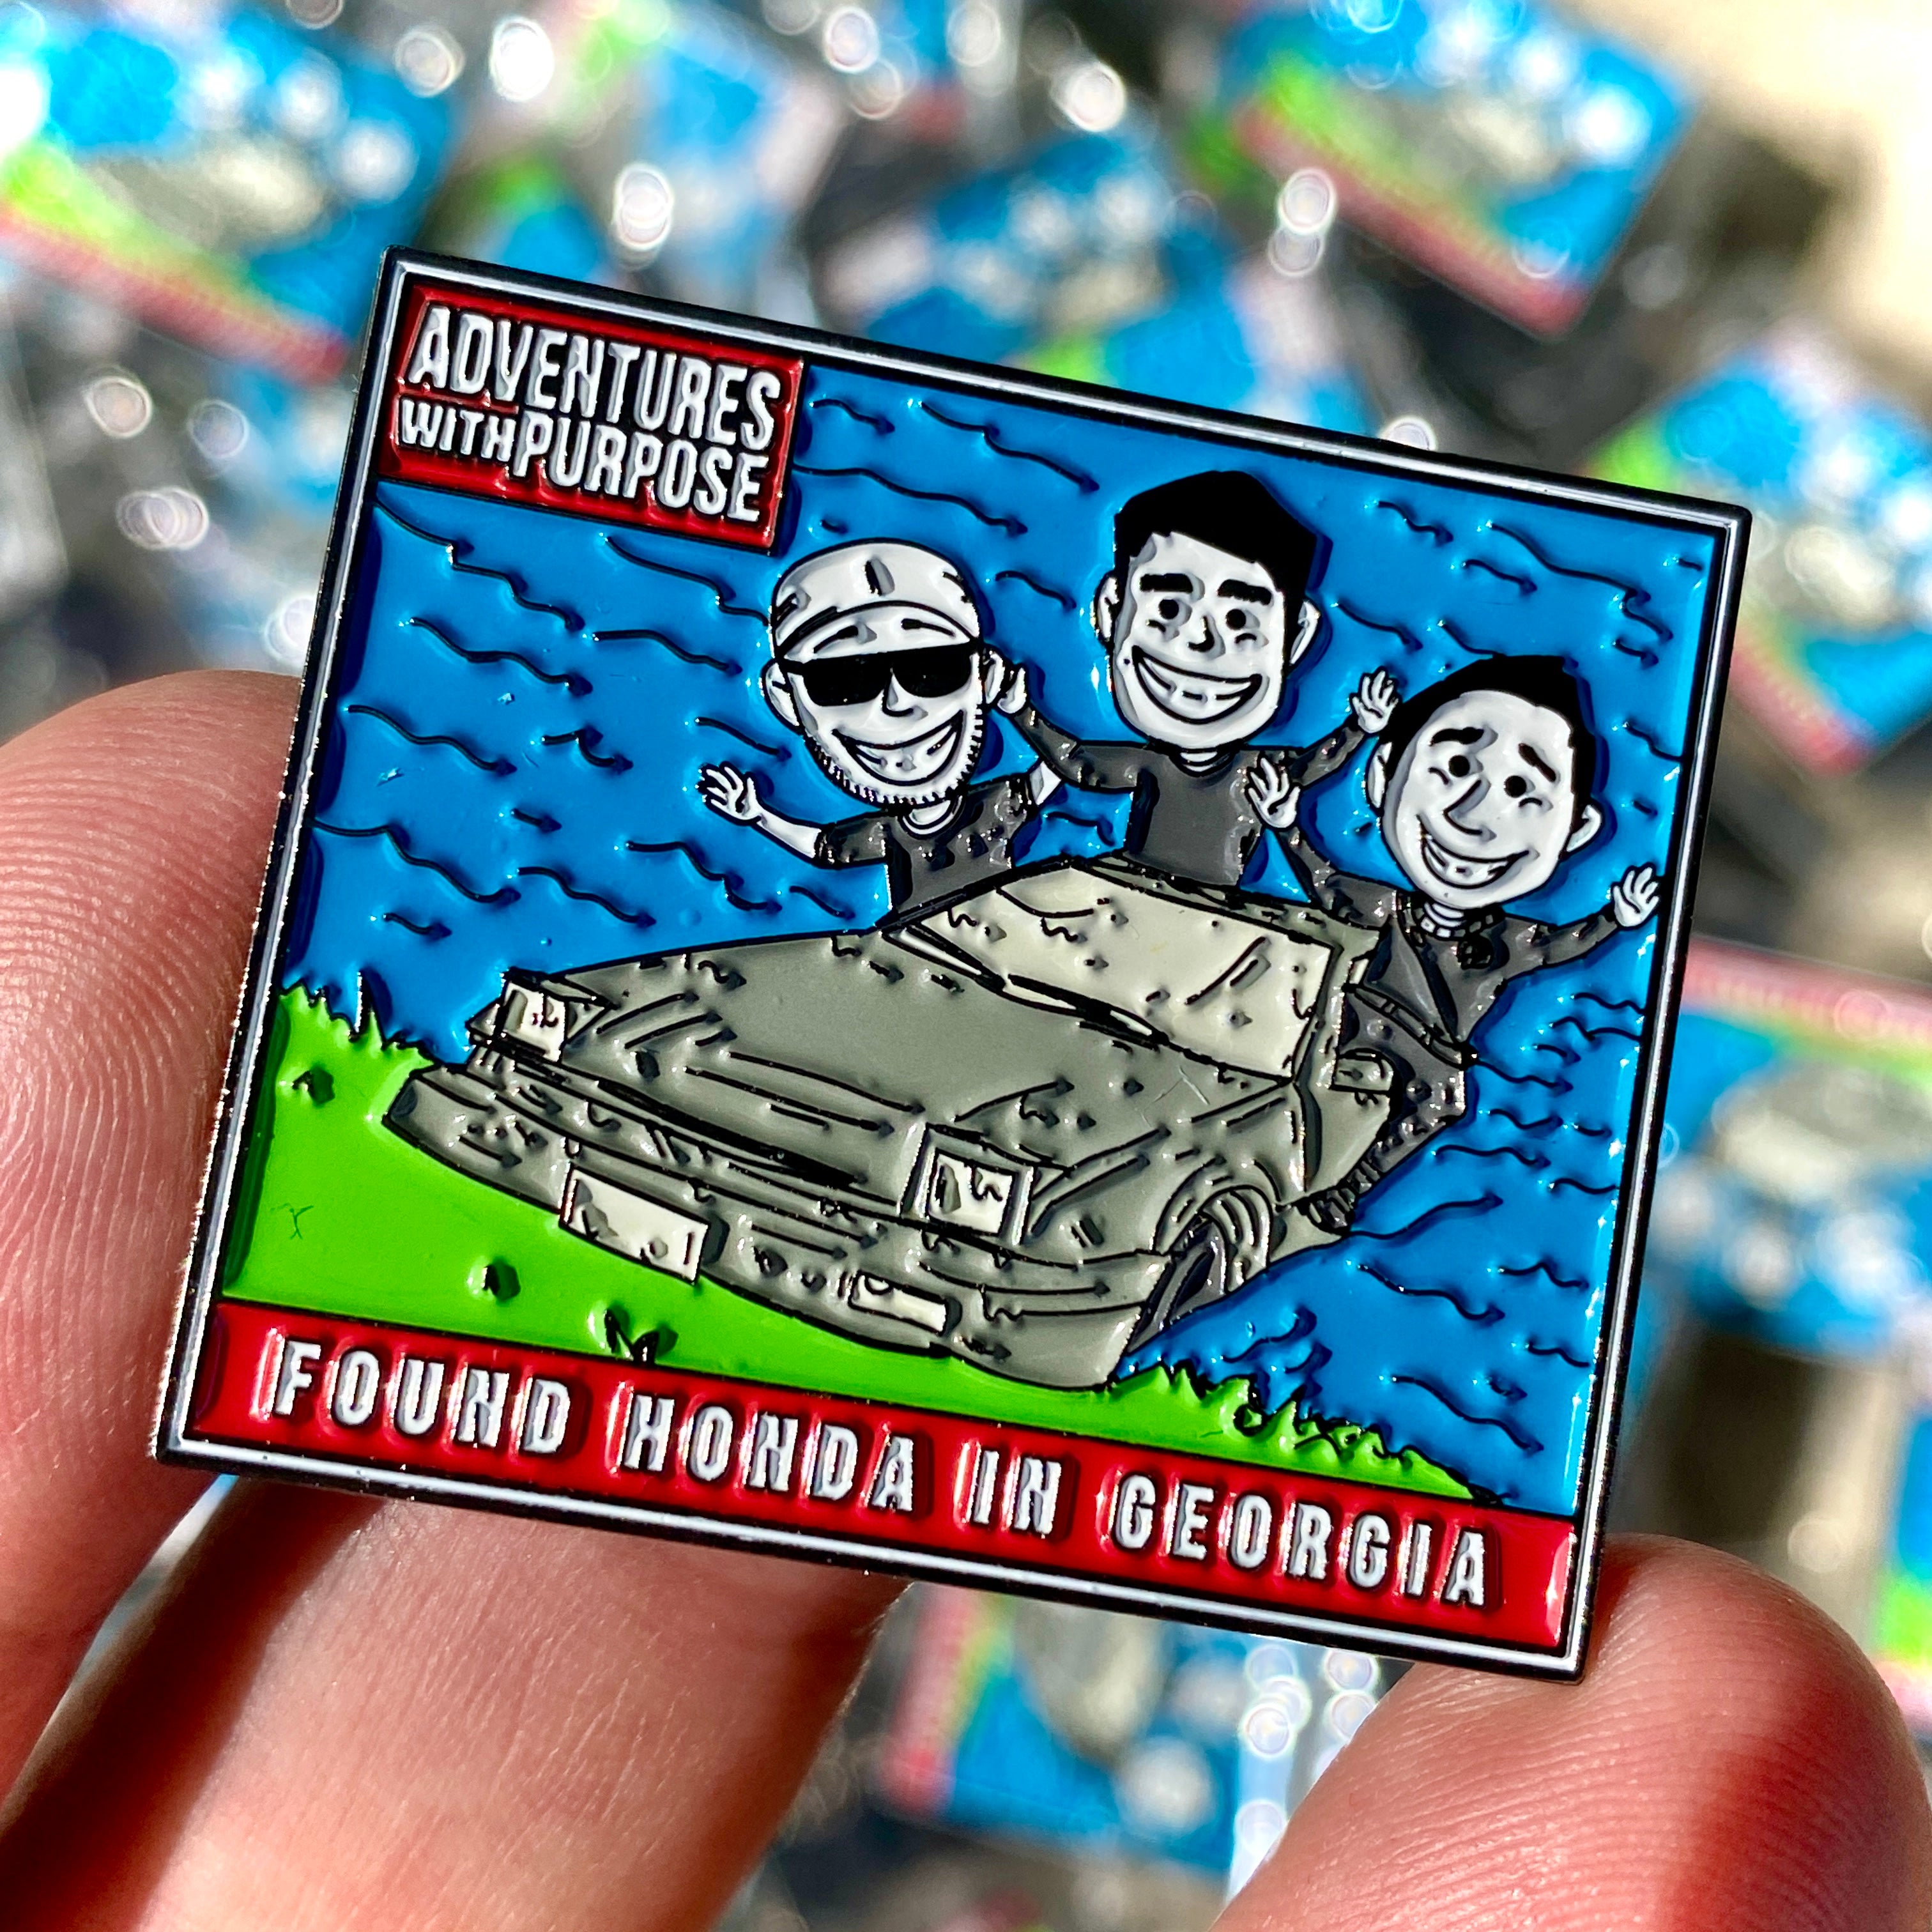 Collector Pin: FOUND HONDA IN GEORGIA (LIMITED RELEASE)